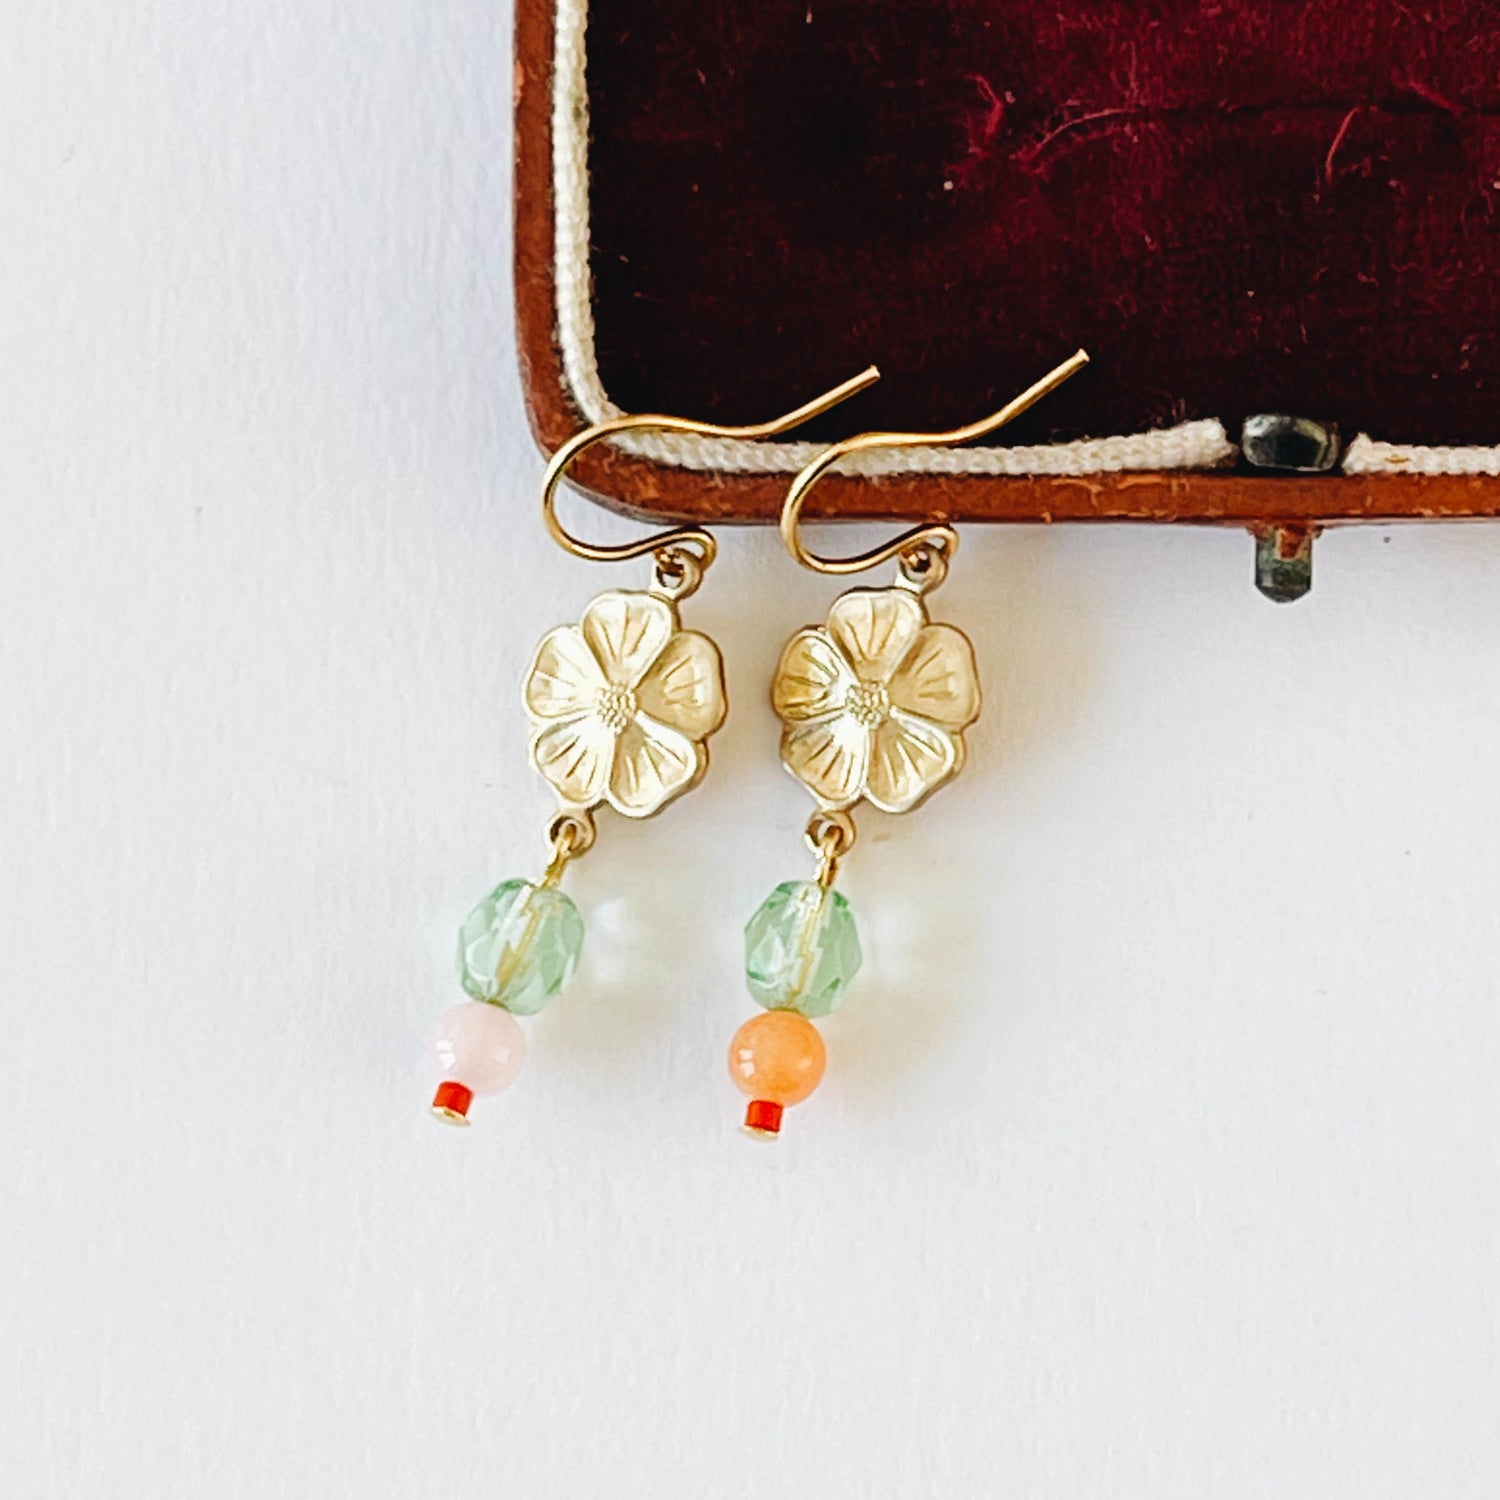 Small Flower And Bead Earrings